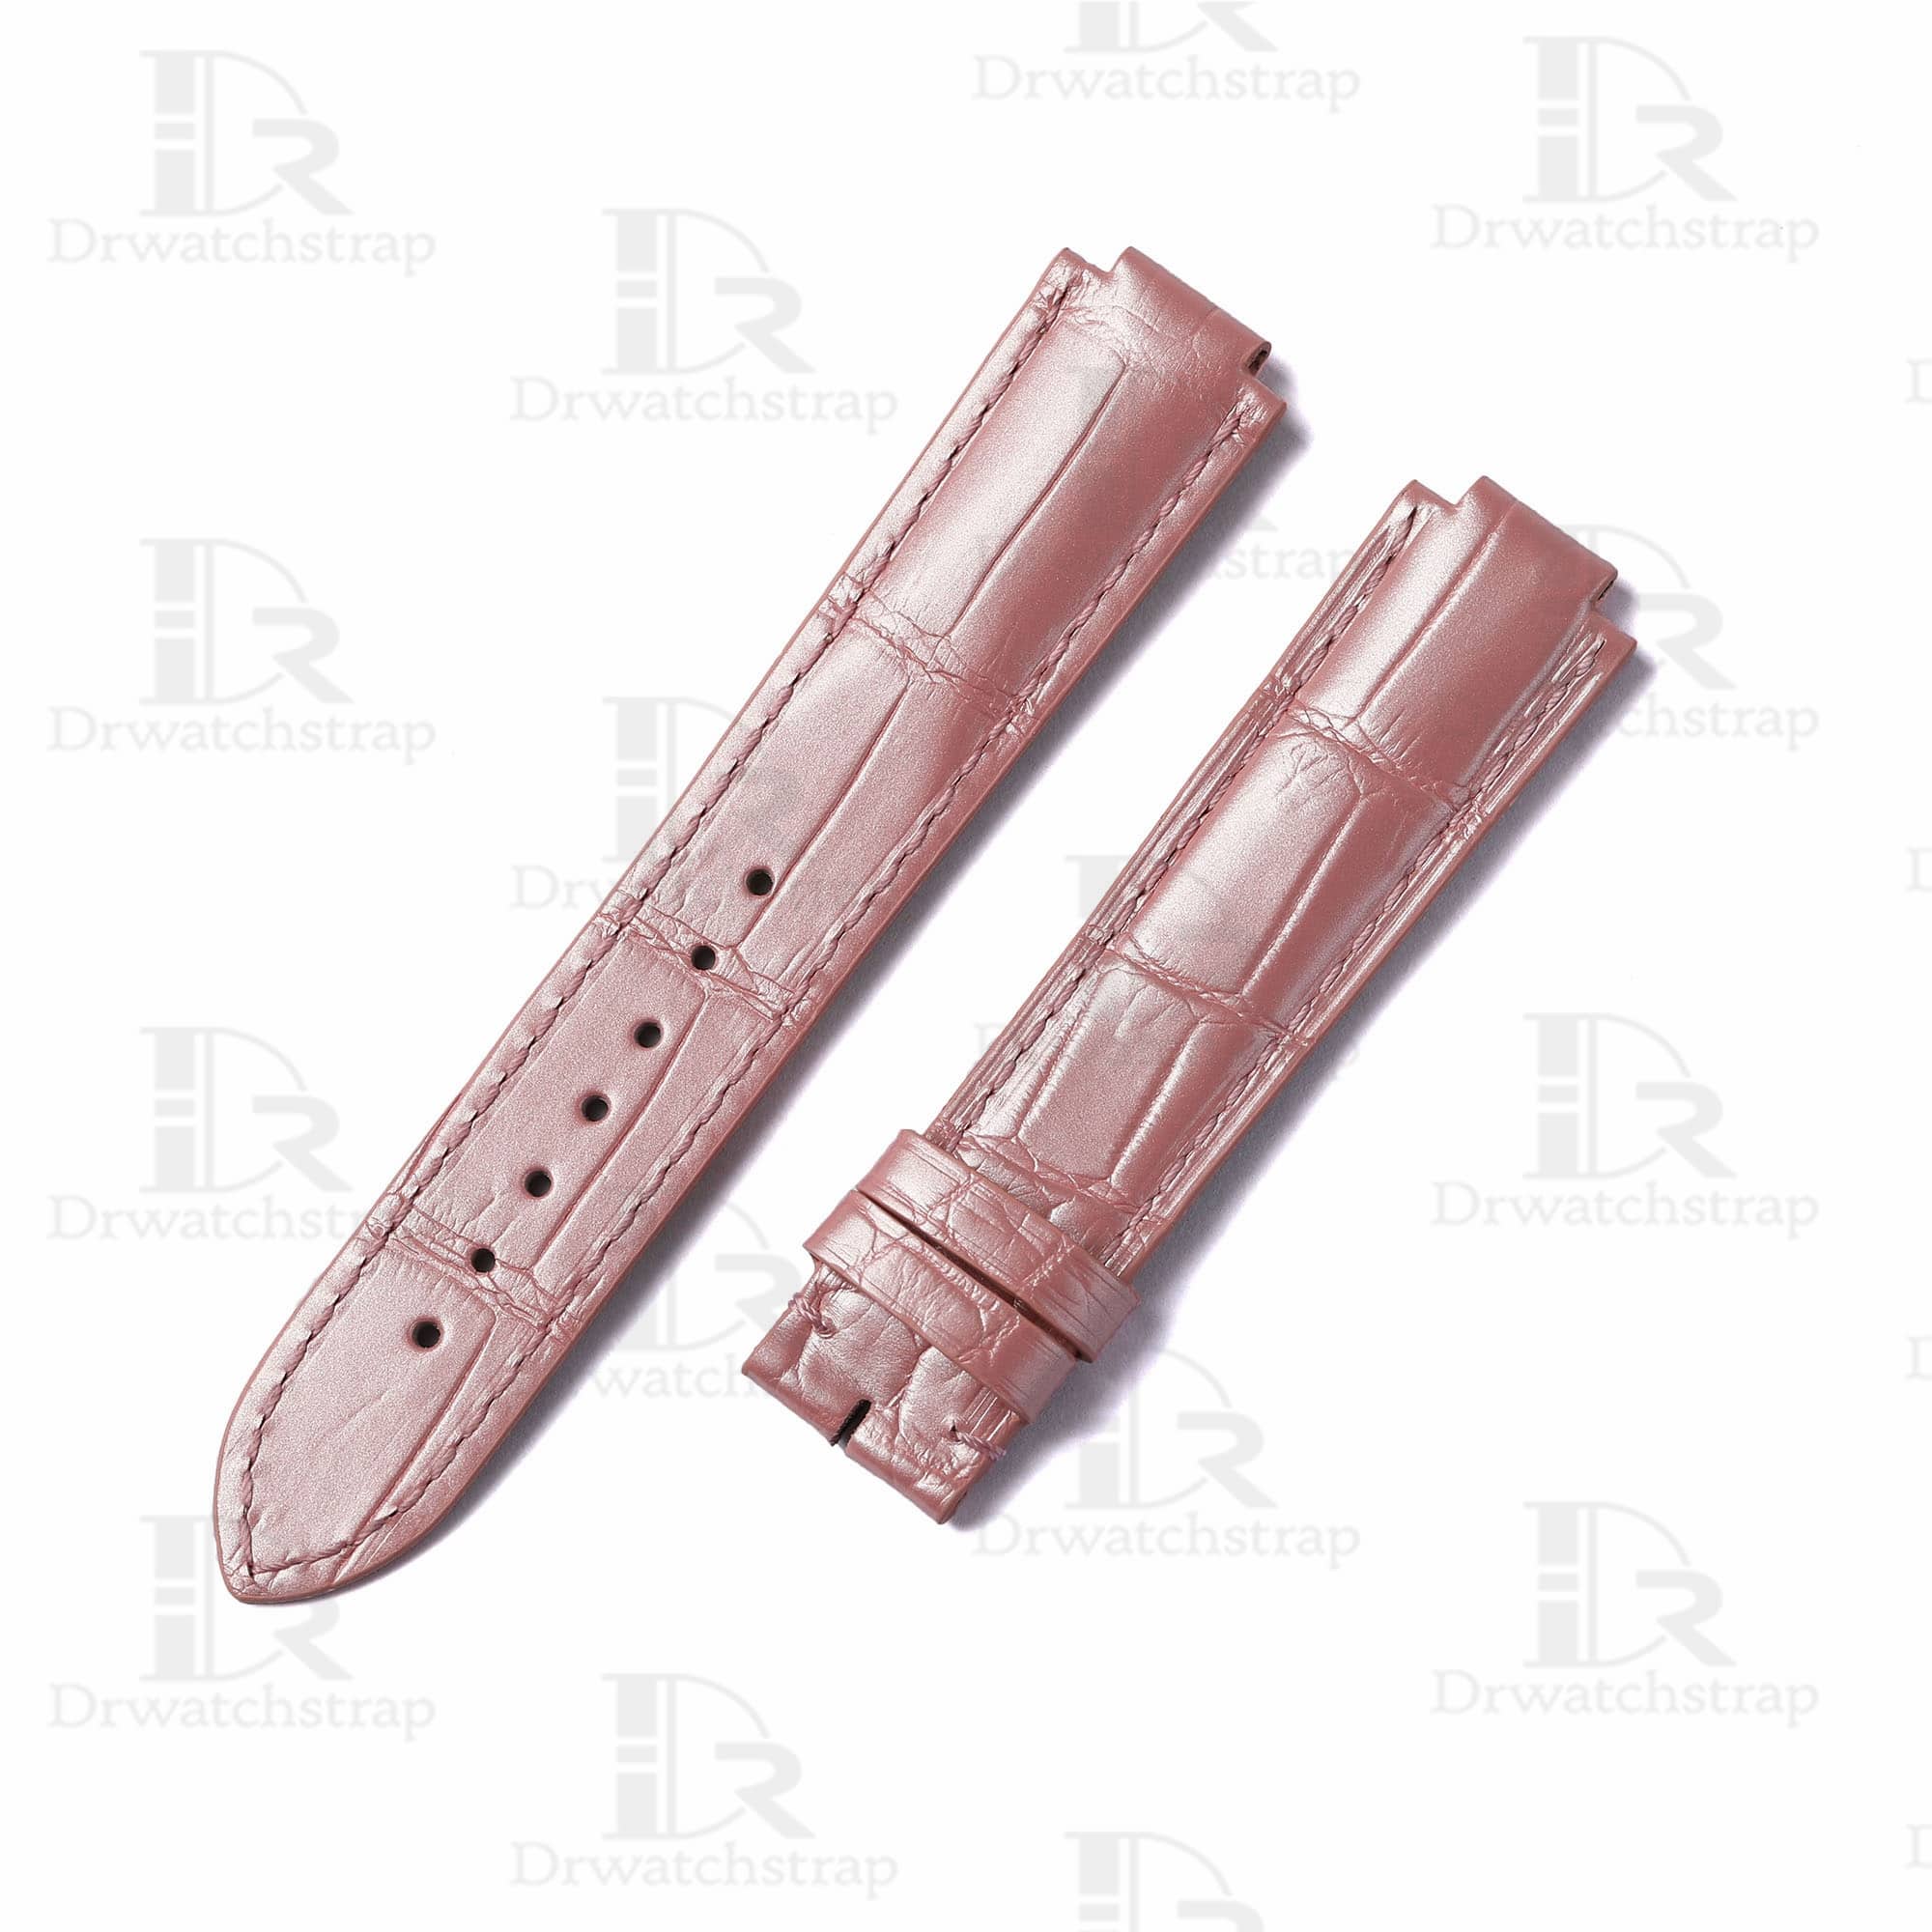 Genuine best quality OEM custom American Alligator pink Belly-scale replacement Cartier Ballon Bleu de watch leather strap & watch band with pin buckle from dr watchstrap for Cartier de Ballon Bleu watches online - Shop the high-end watch straps & watchbands at a low price